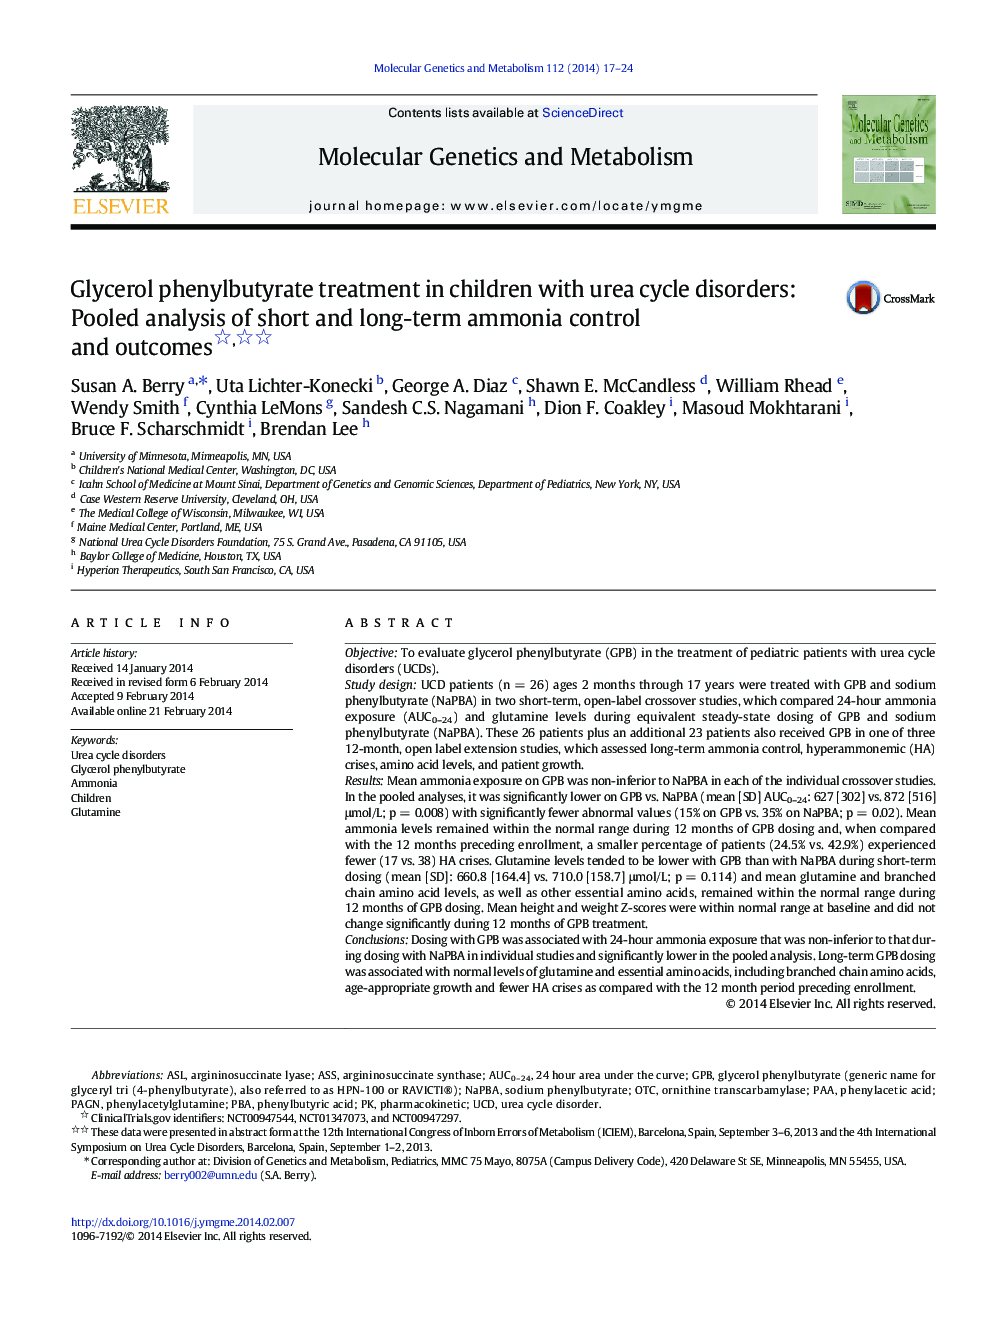 Glycerol phenylbutyrate treatment in children with urea cycle disorders: Pooled analysis of short and long-term ammonia control and outcomes